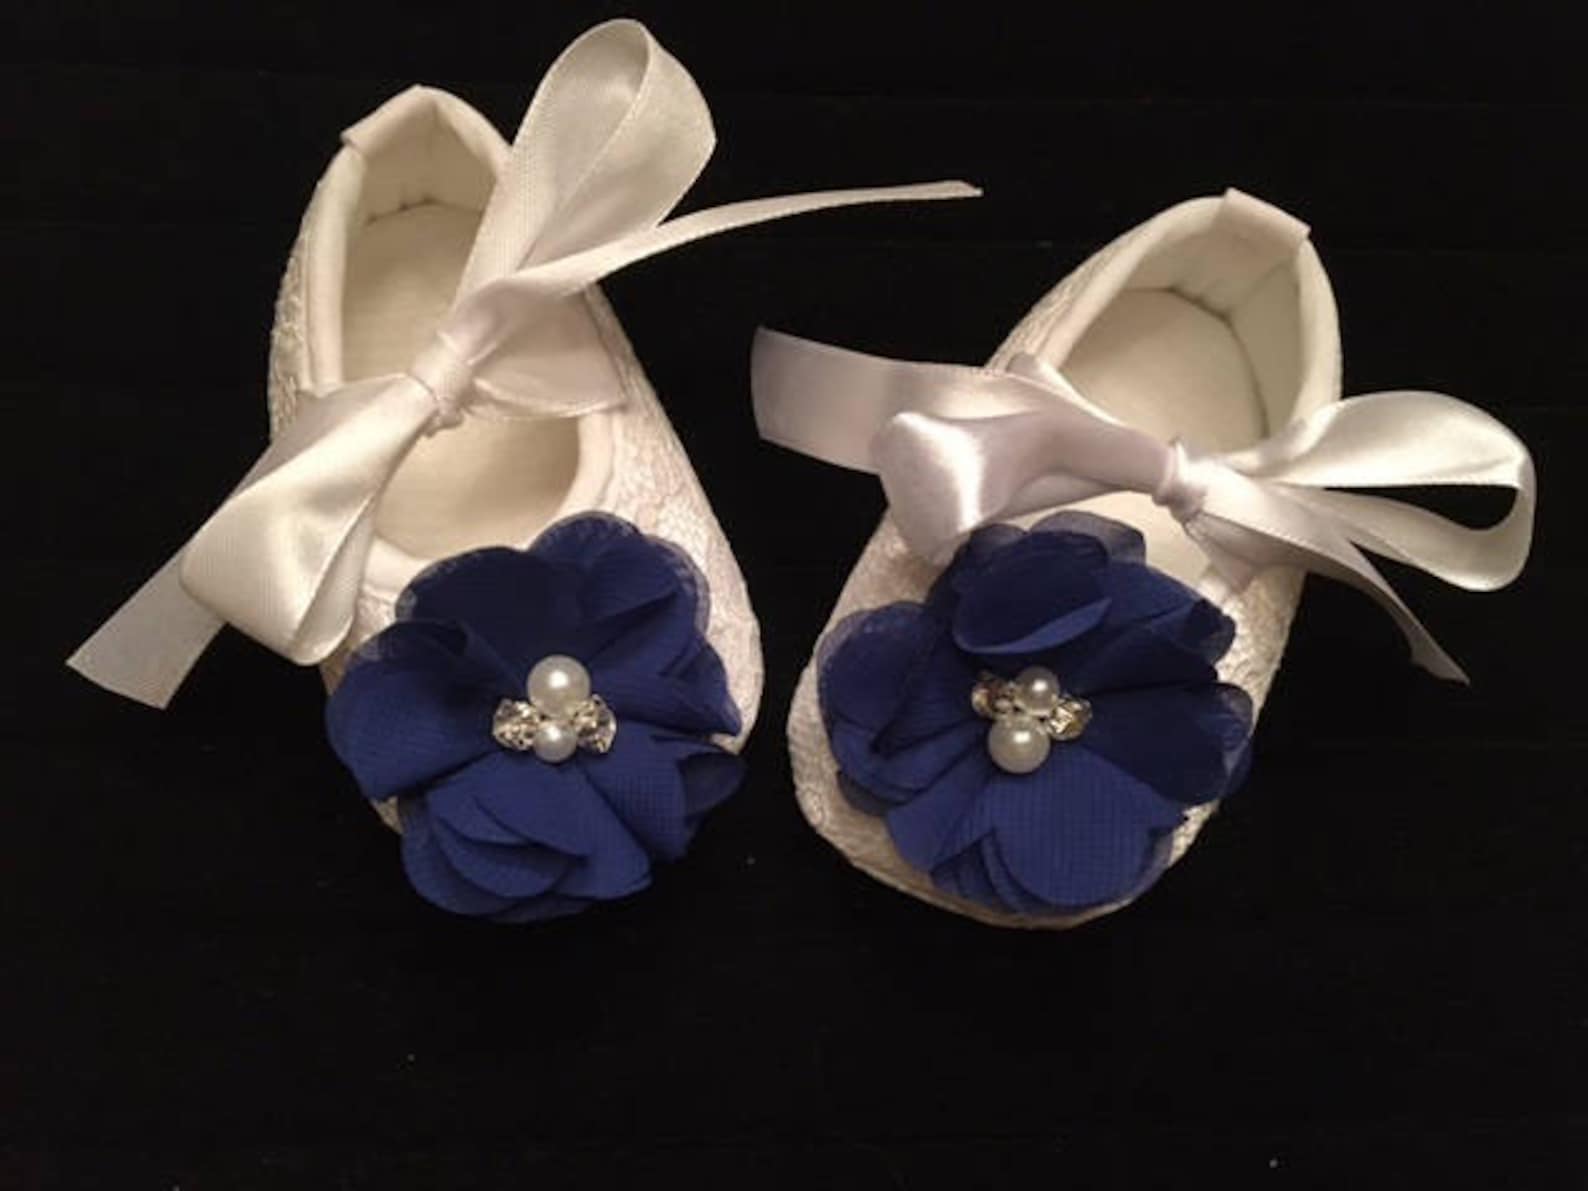 white lace baby shoes with royal blue flower - baby flower girl baby shoes - baby dress christmas shoes - baby ballet slippers